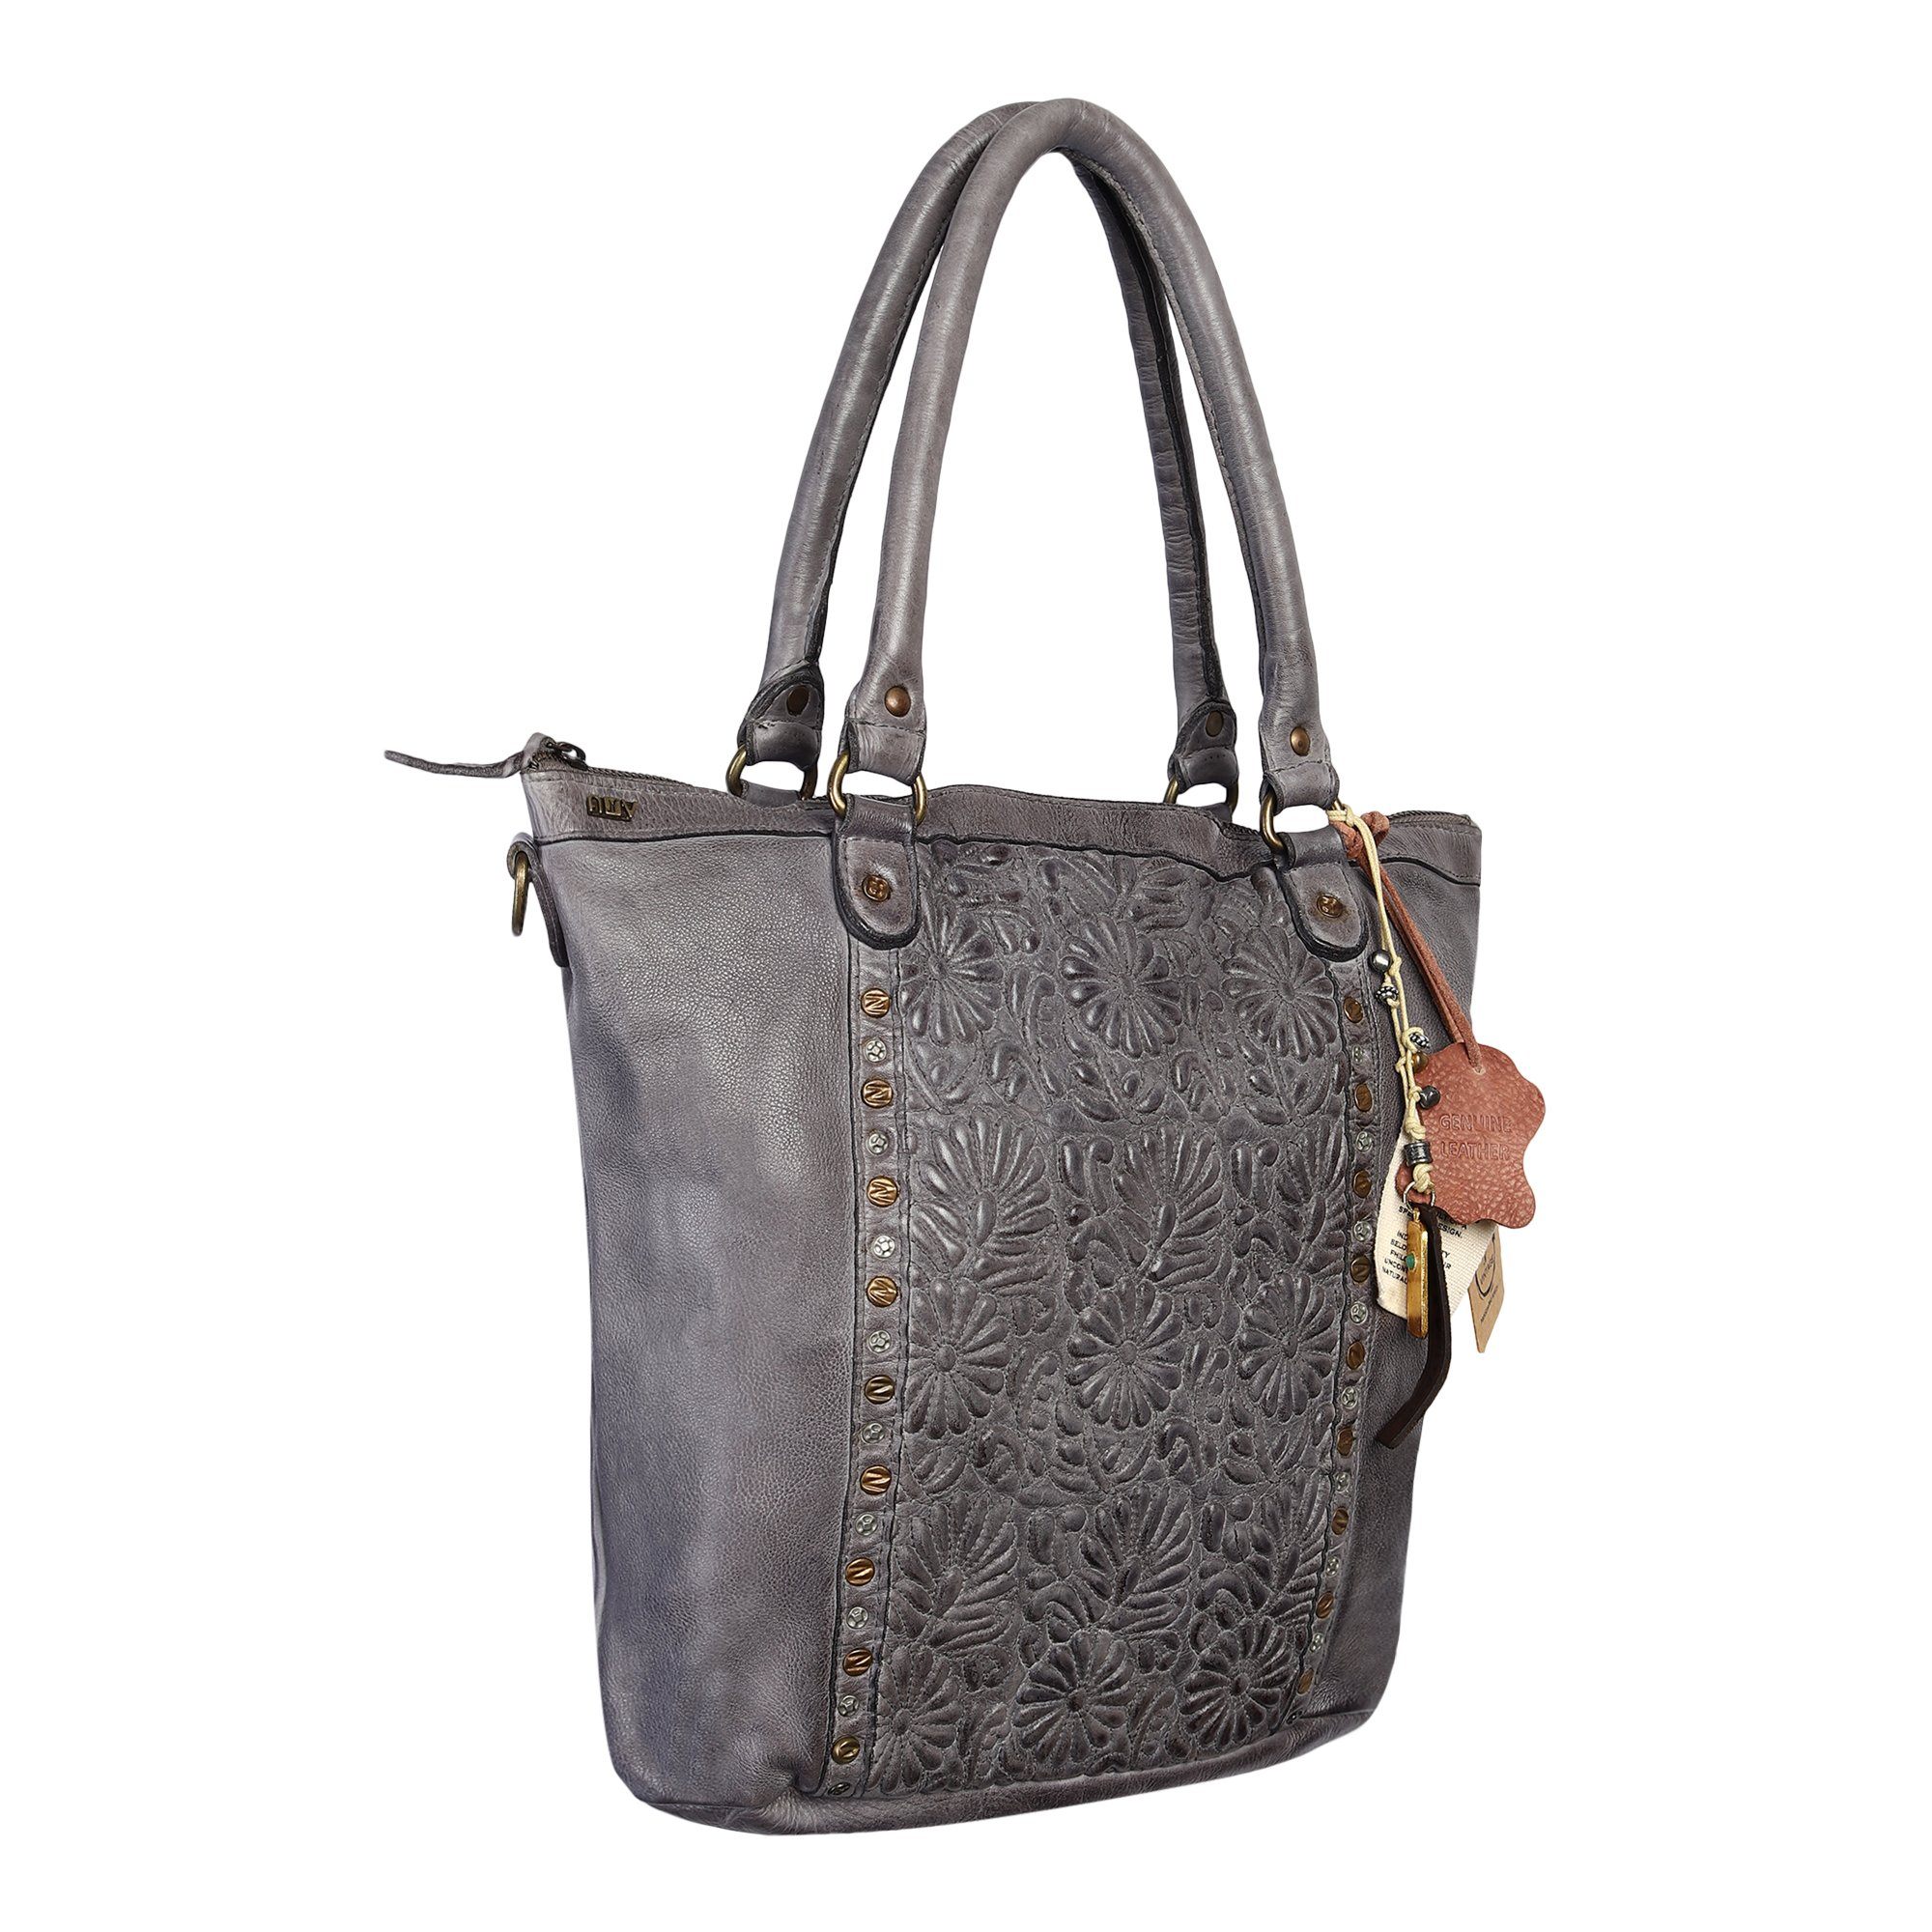 Fiori Designer Bag: Grey leather shopper with embroidery by Art N Vintage